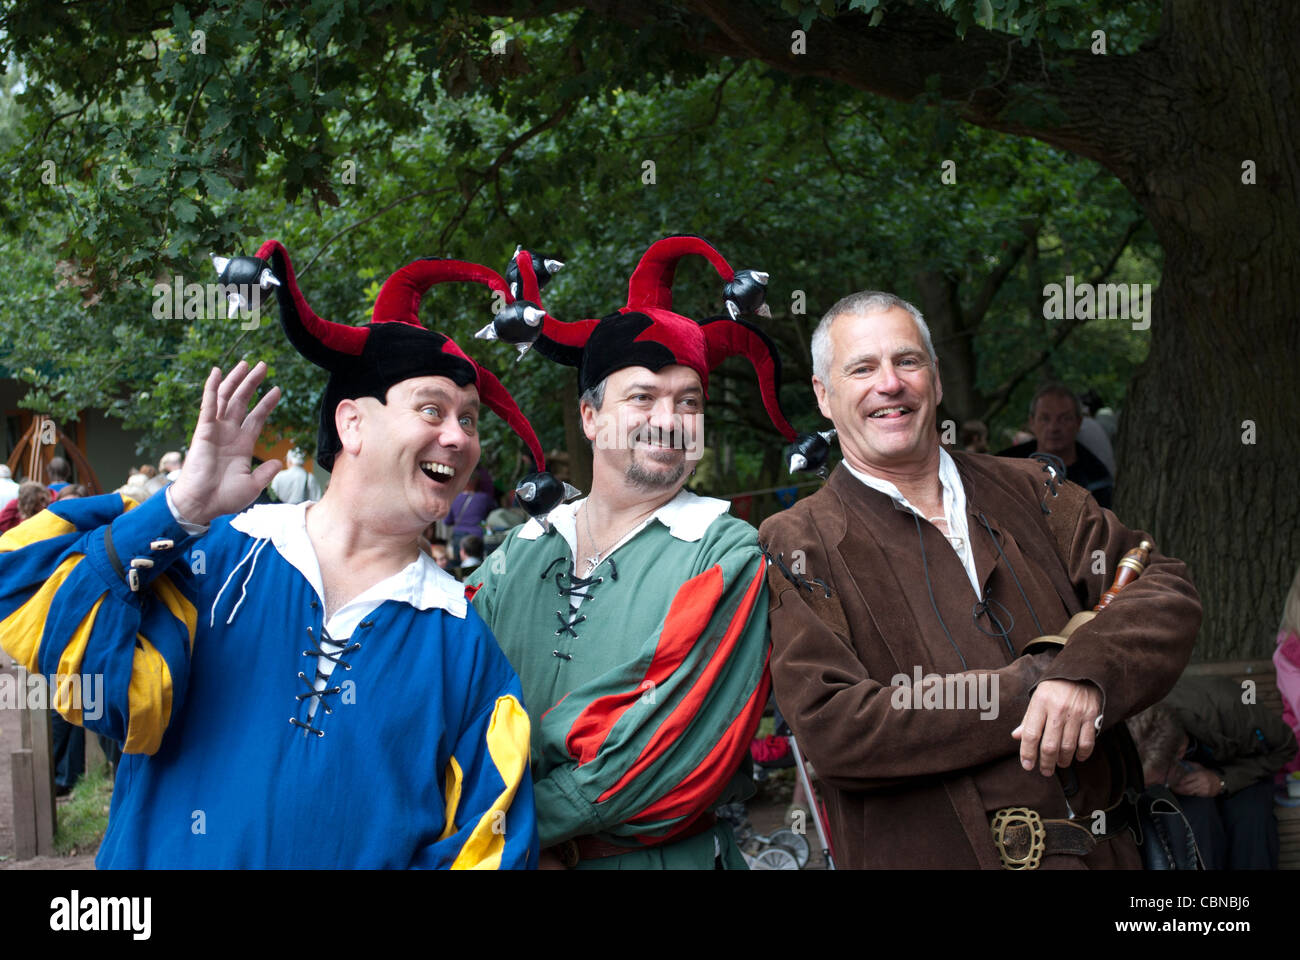 Three men in medieval clothing, two with jester hats on, smiling and laughing and waving at the Robin Hood festival Stock Photo